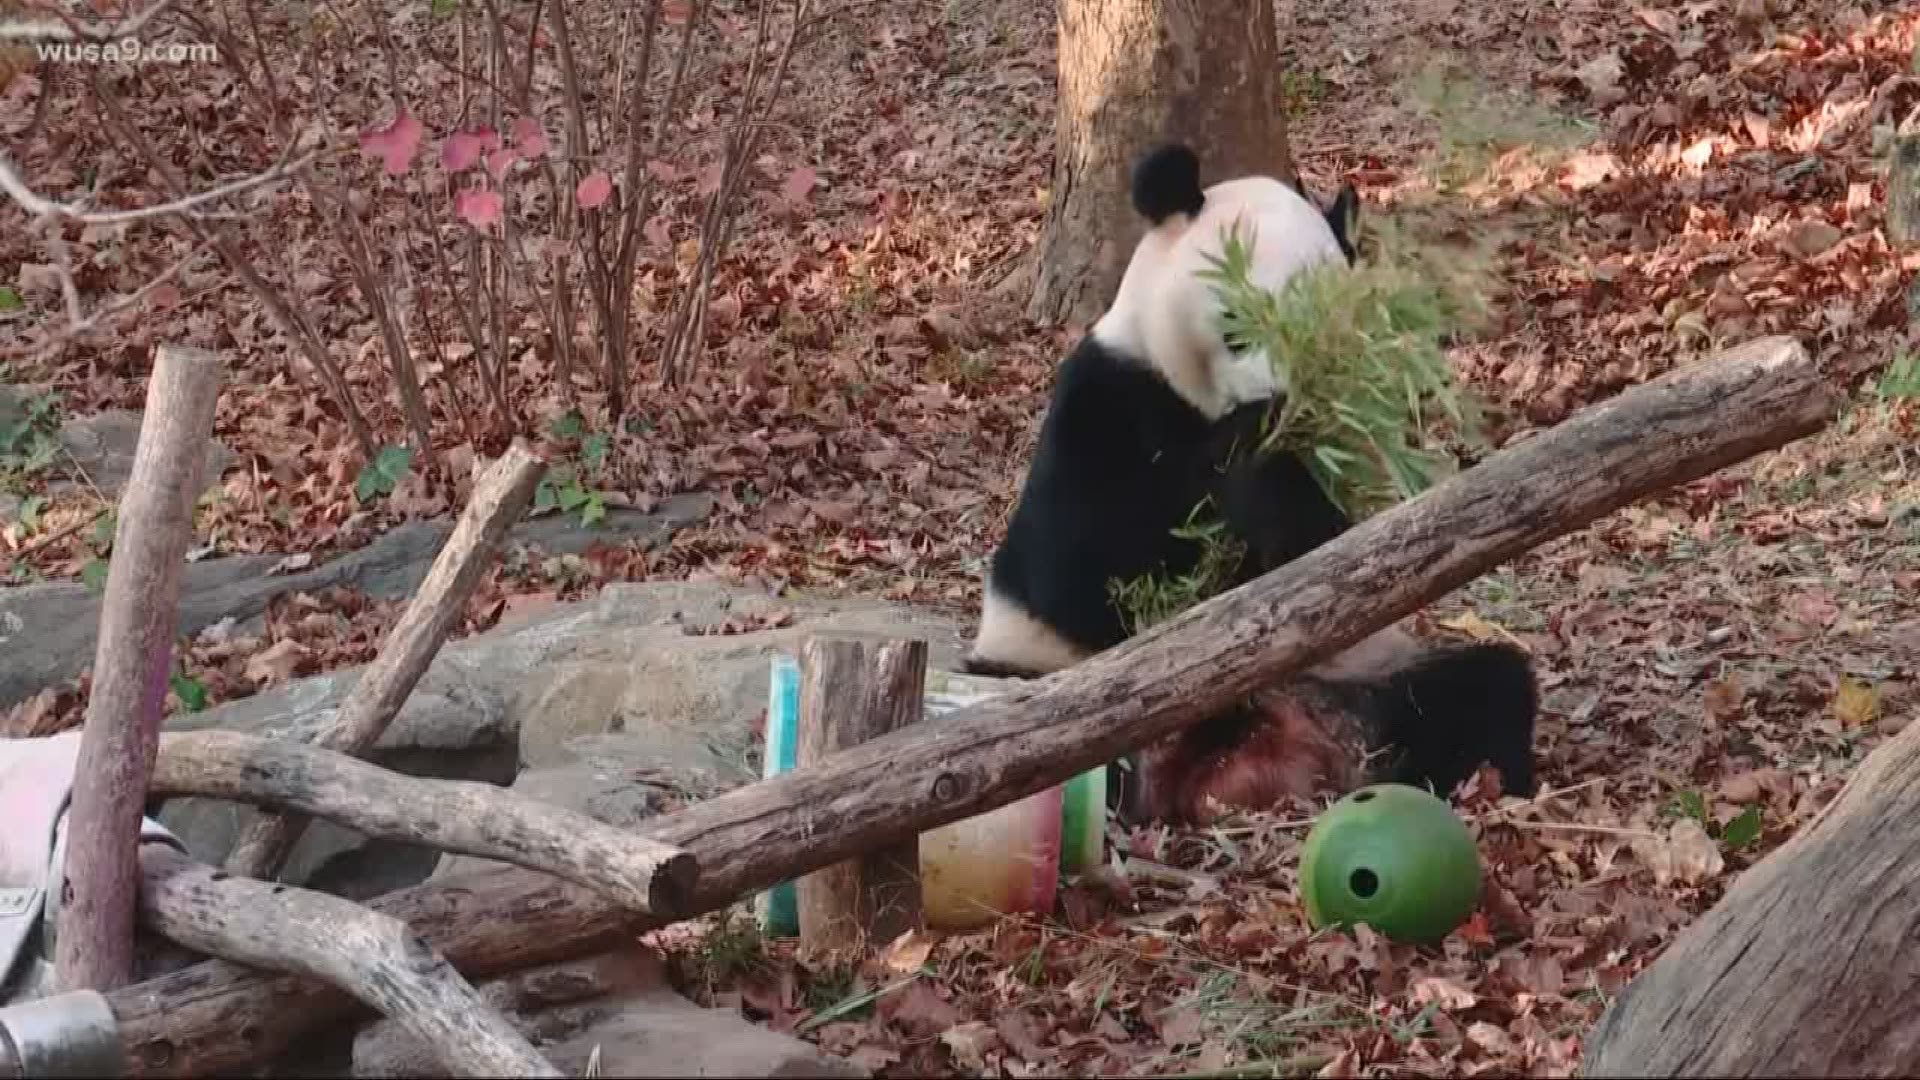 Bei Bei heads to China Tuesday, but there's still time to say goodbye.